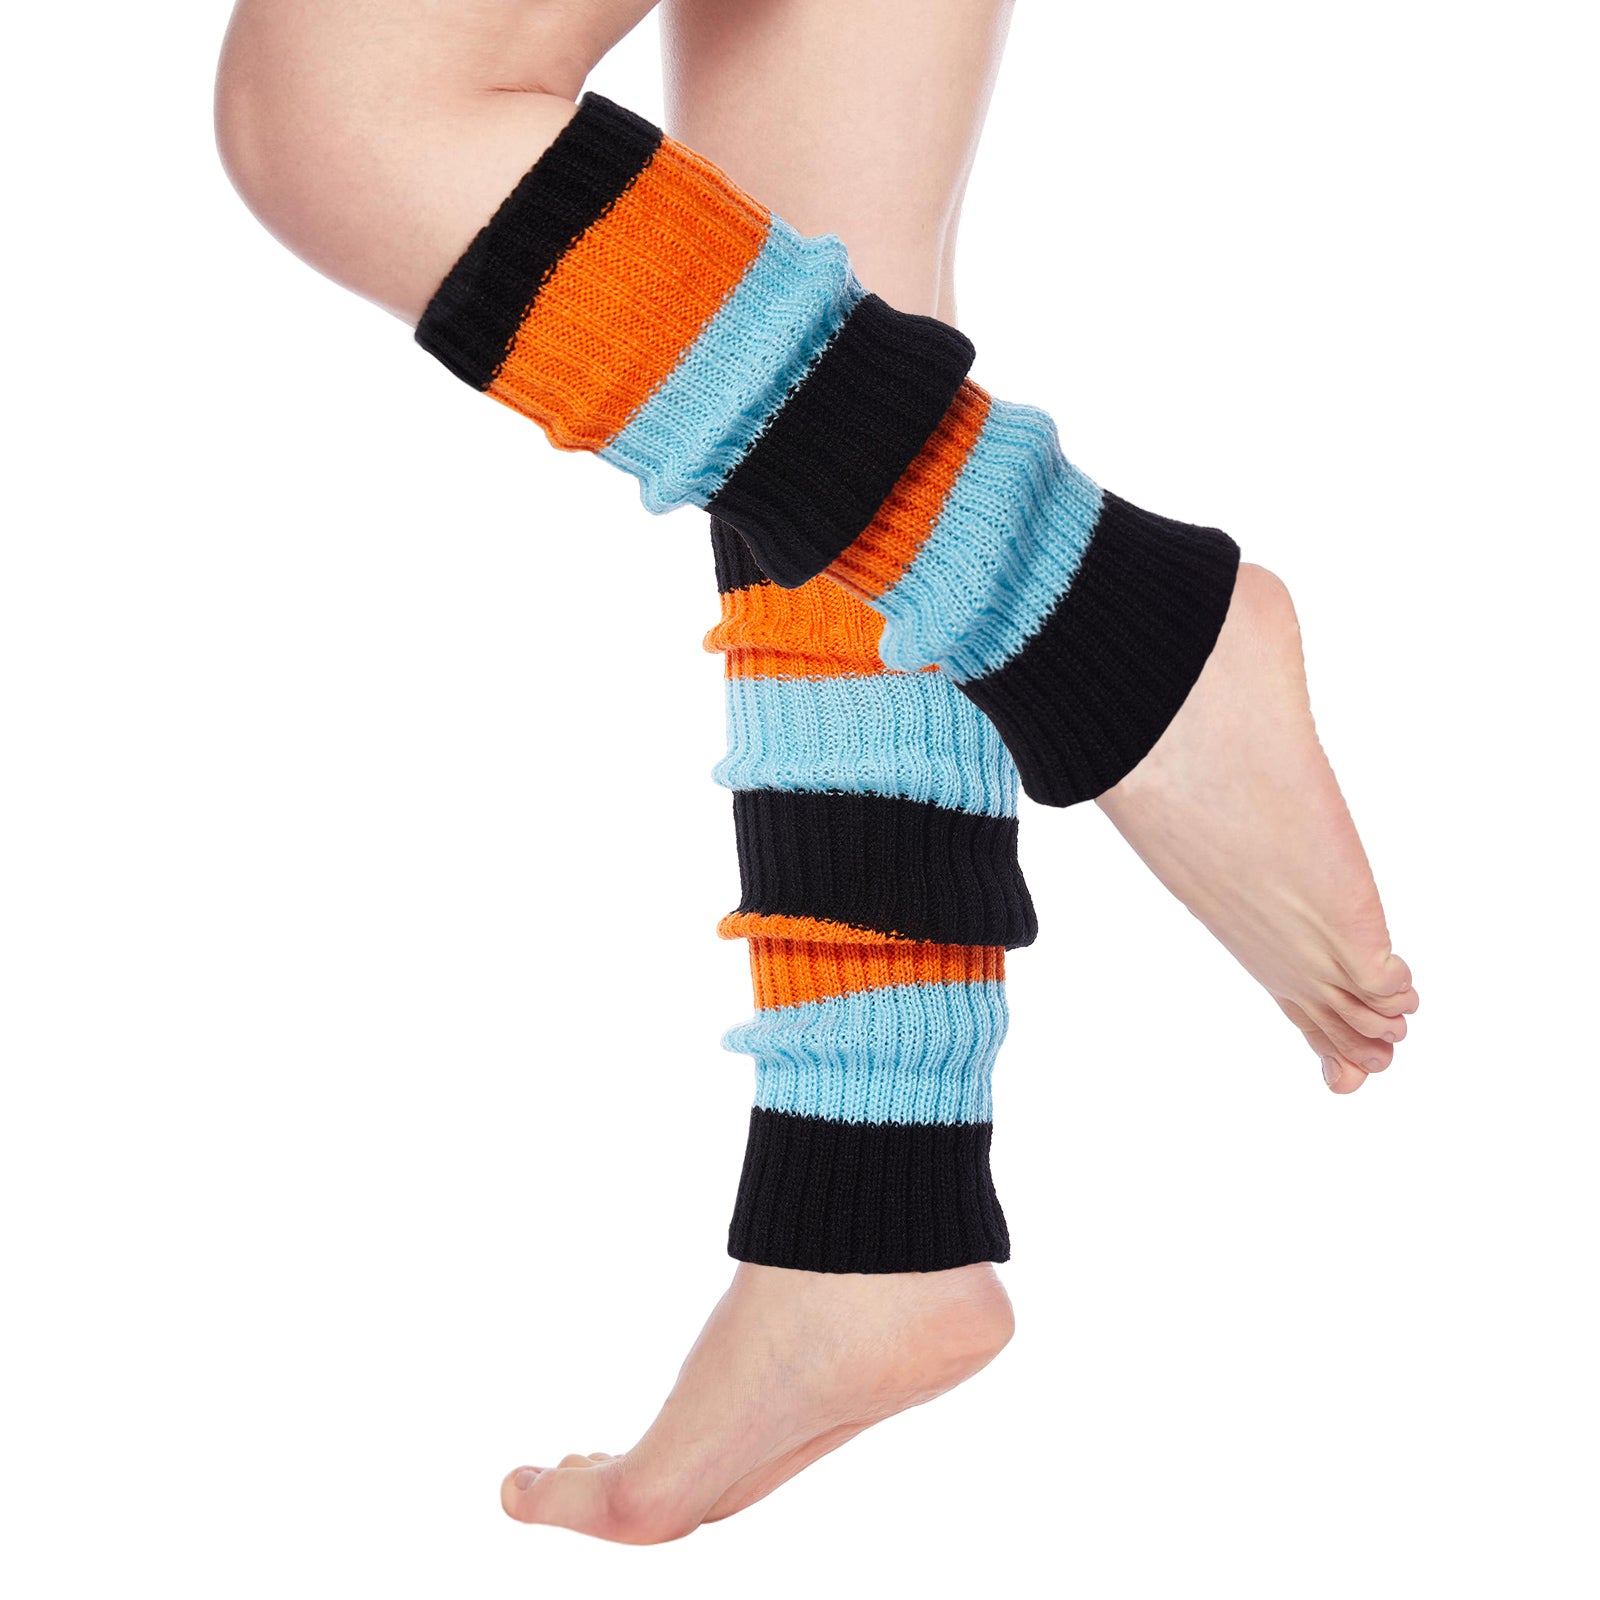 http://moonwoodwear.com/cdn/shop/products/Womens-Leg-Warmers-Neon-Knitted-for-80s-Party-Sports-Yoga-Black-Blue-Bright-Orange.jpg?v=1679390337